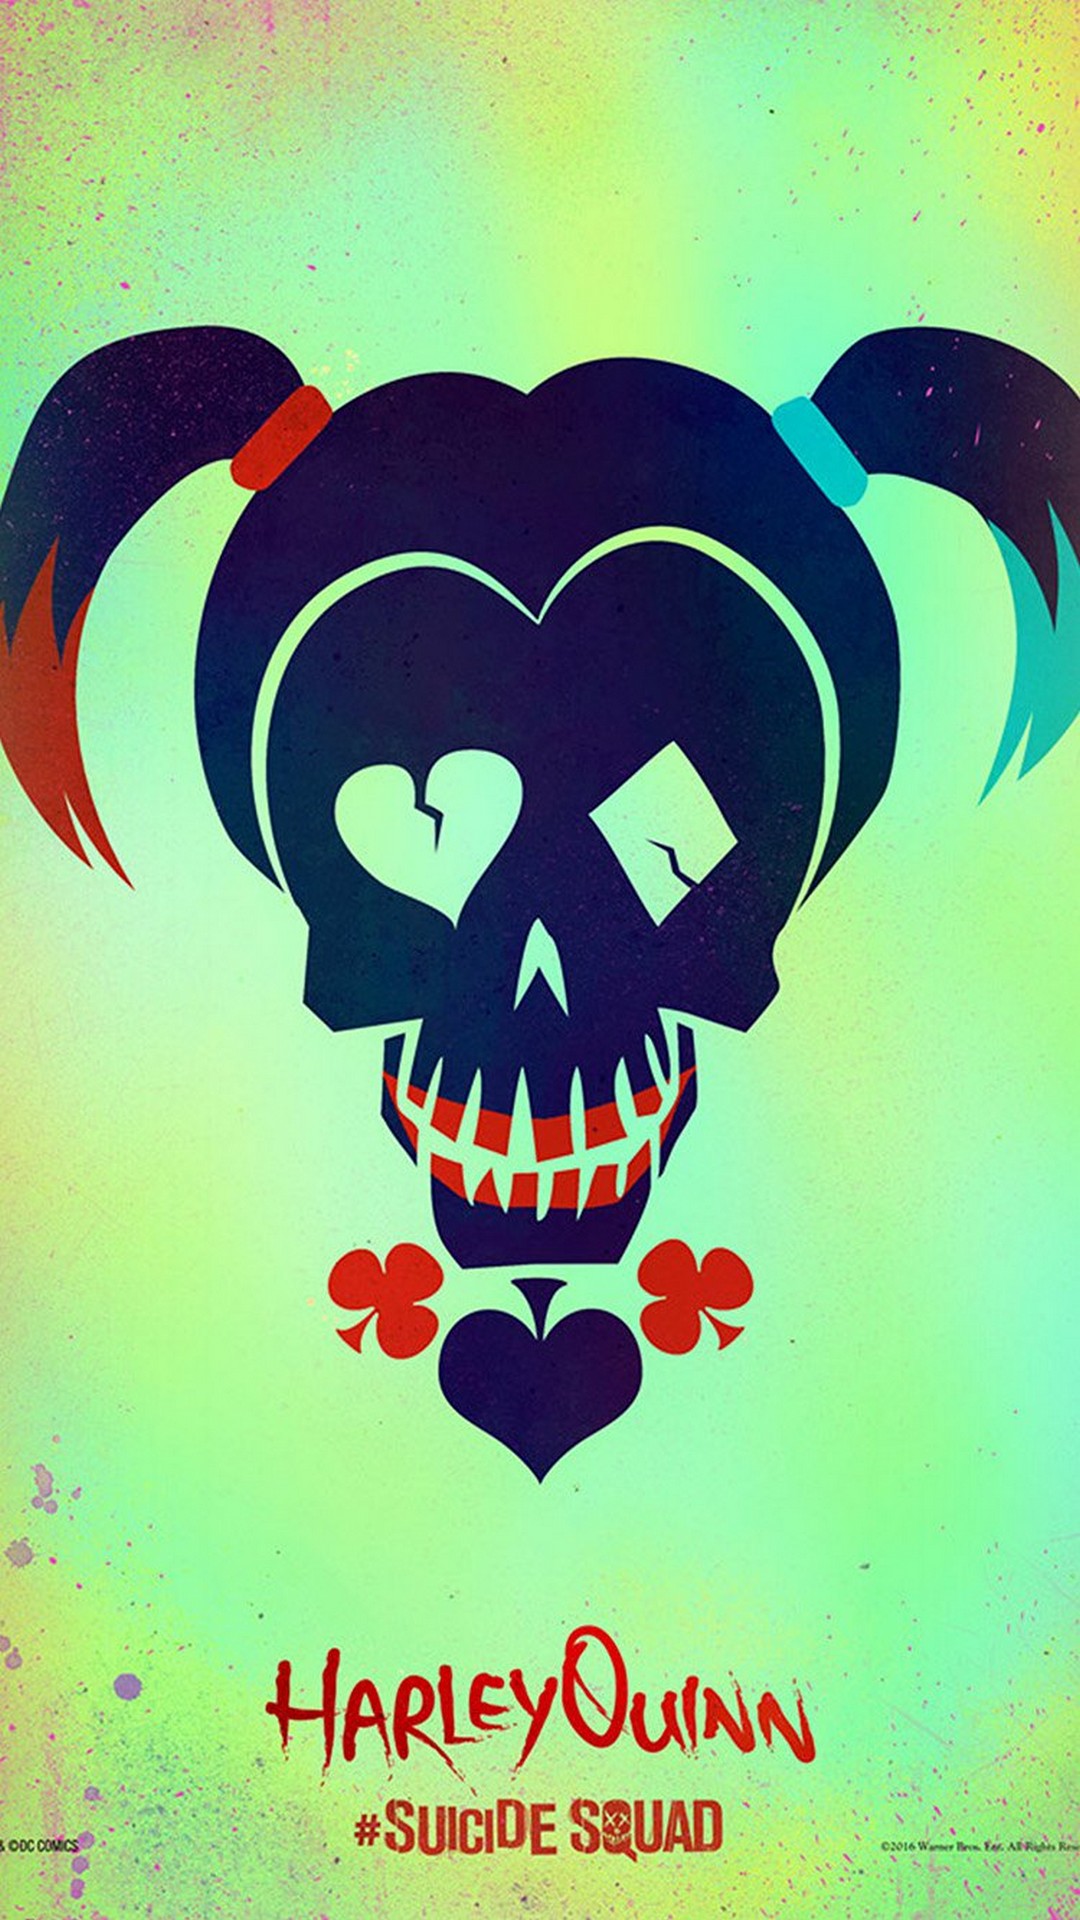 Harley Quinn Movie Wallpaper For iPhone with resolution 1080X1920 pixel. You can make this wallpaper for your iPhone 5, 6, 7, 8, X backgrounds, Mobile Screensaver, or iPad Lock Screen